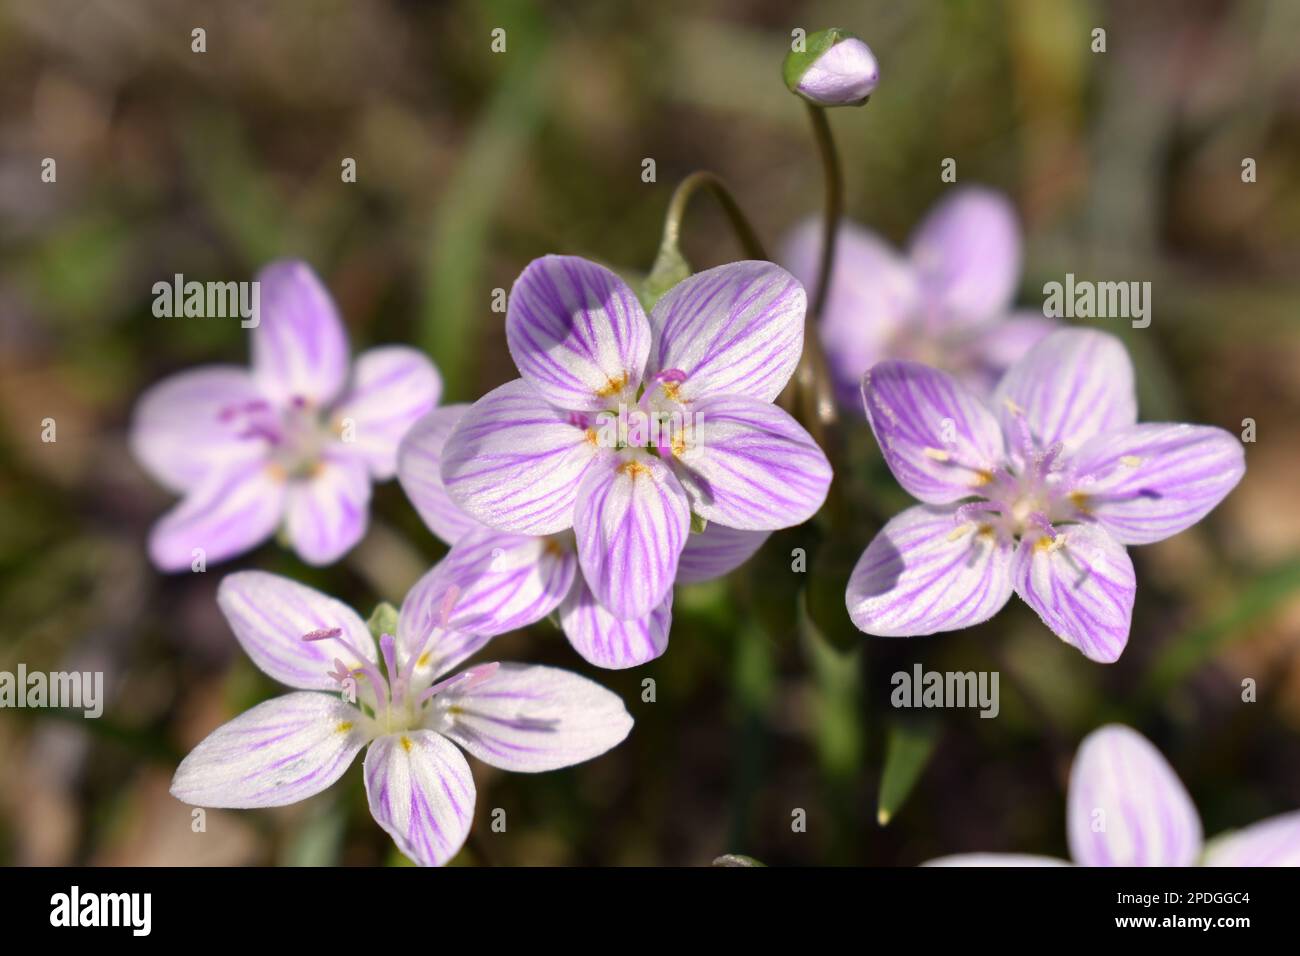 Dainty purple wildflowers, akaEastern Spring Beauty, growing in rural Missouri, MO, United States, US, USA, in the early Spring.  Claytonia Virginica. Stock Photo